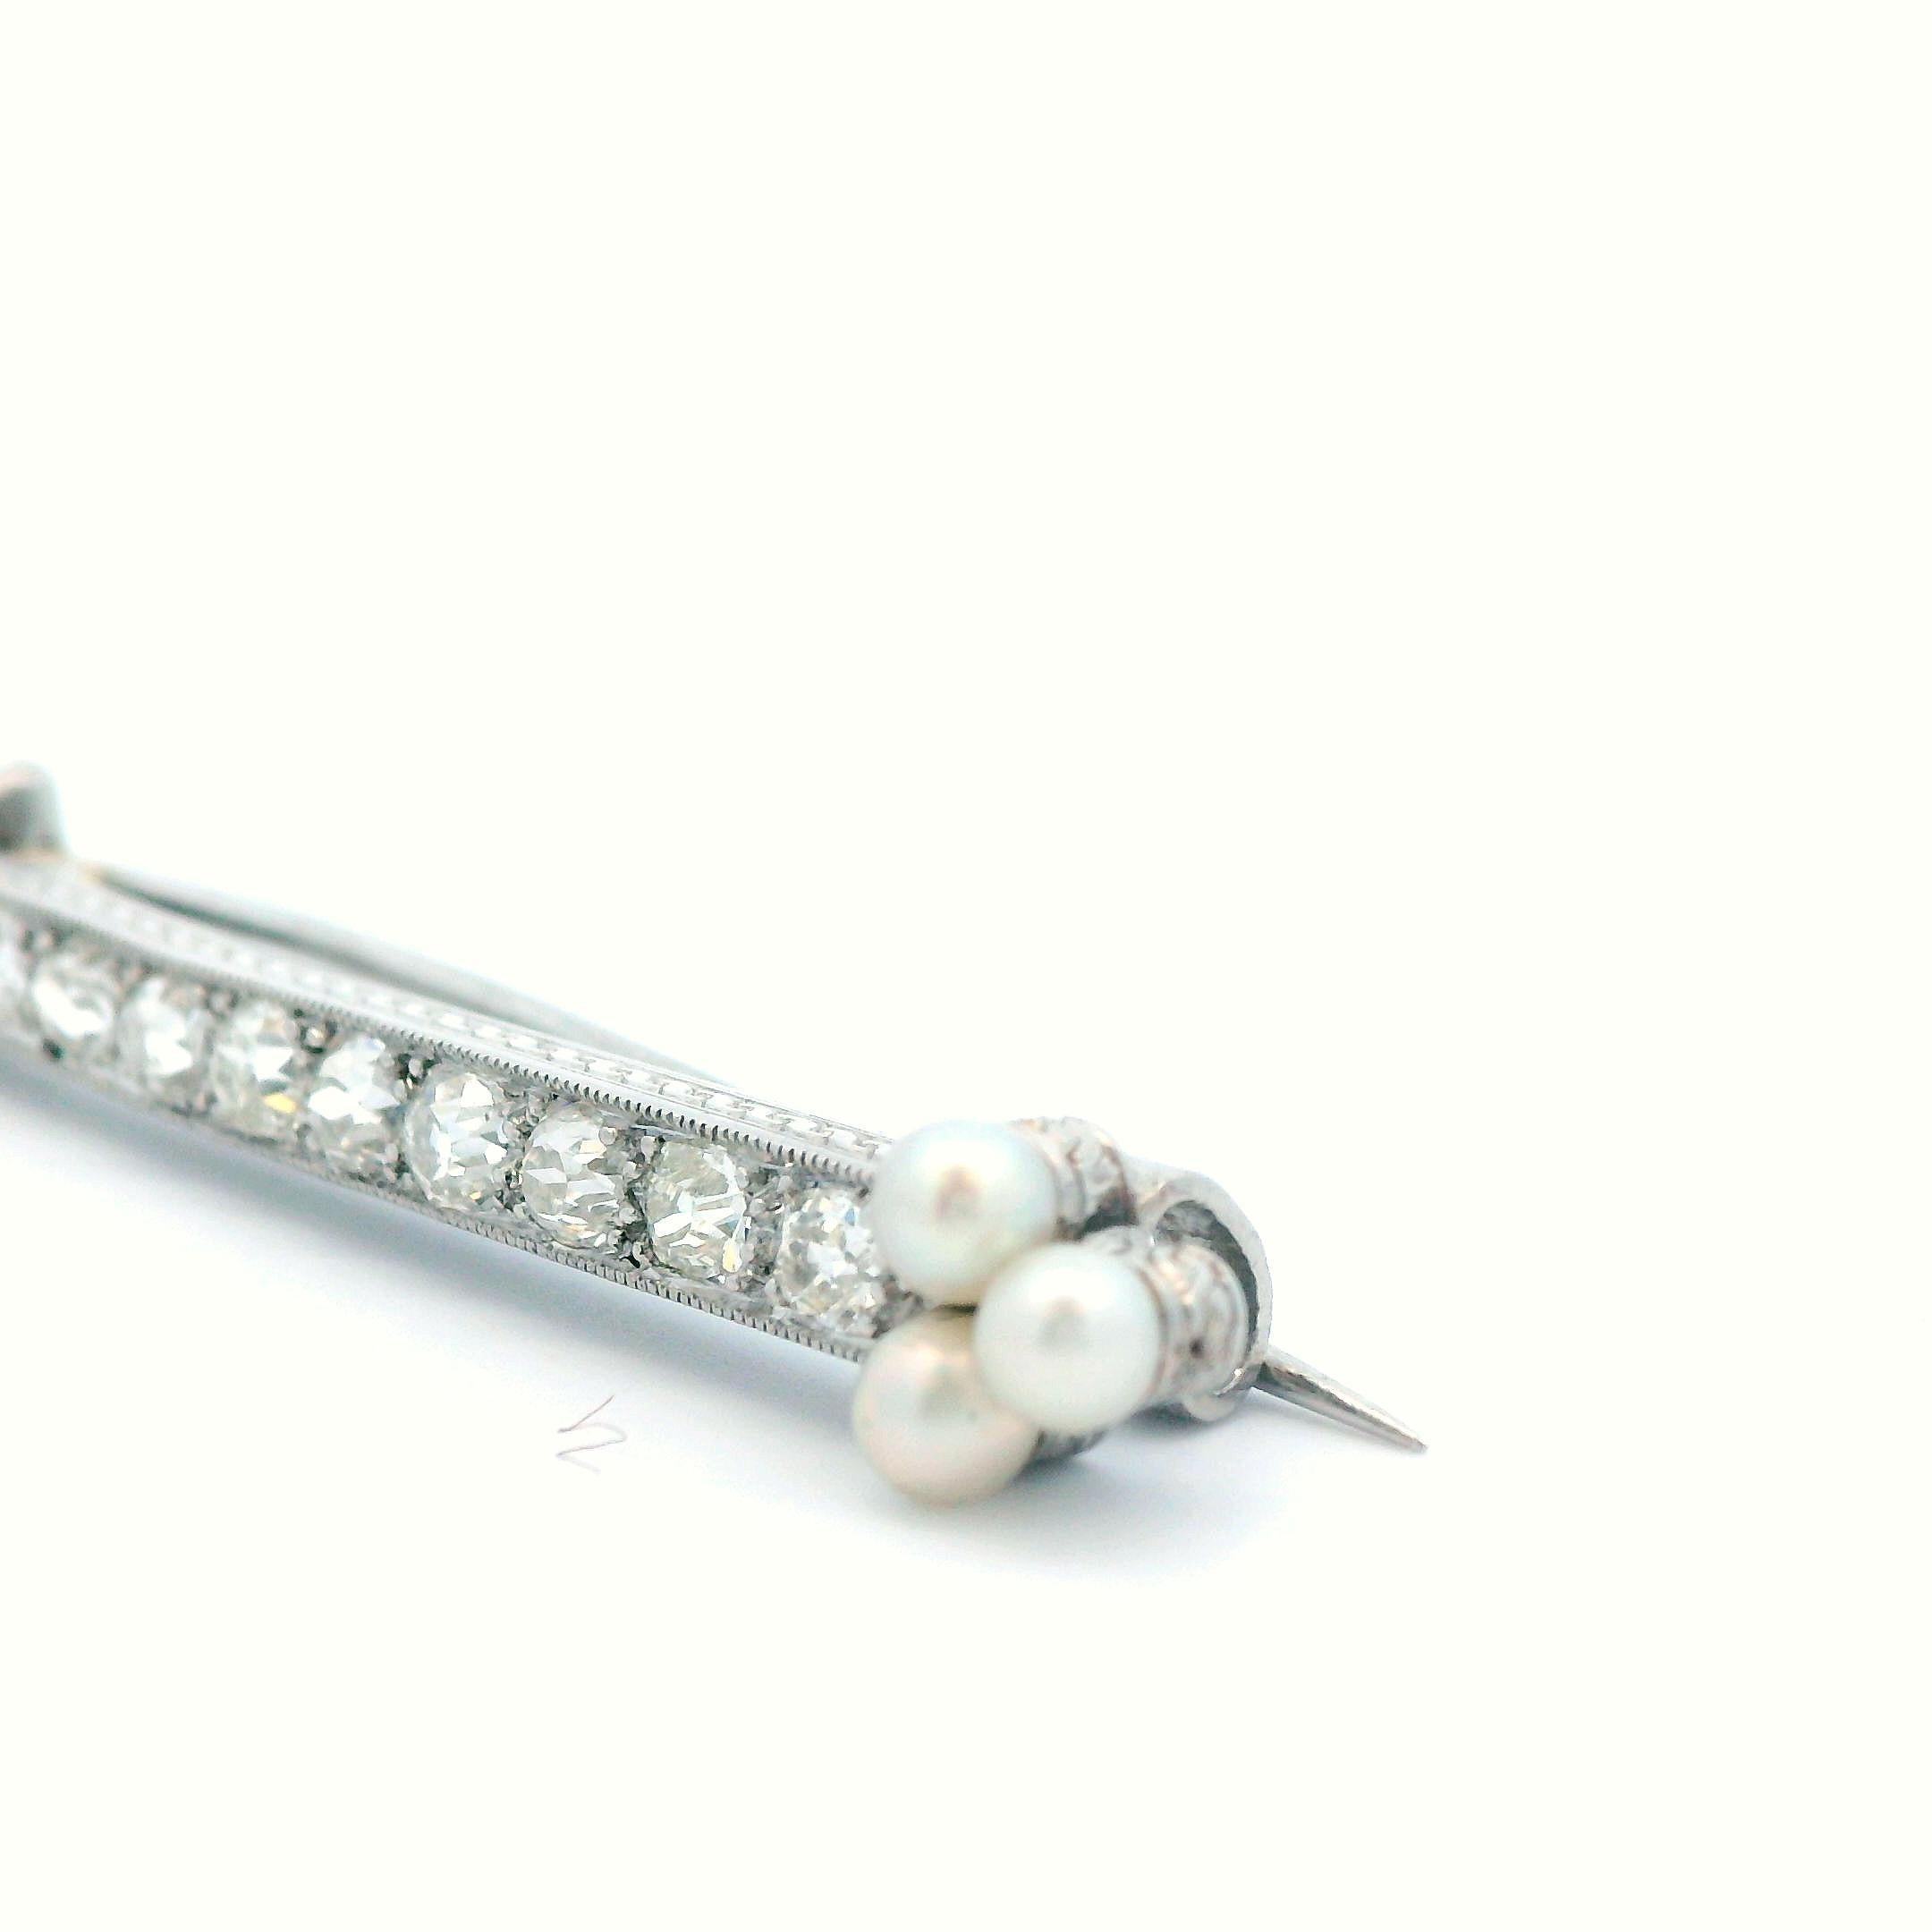 1910 Edwardian Platinum Diamond and Pearl Brooch For Sale 1